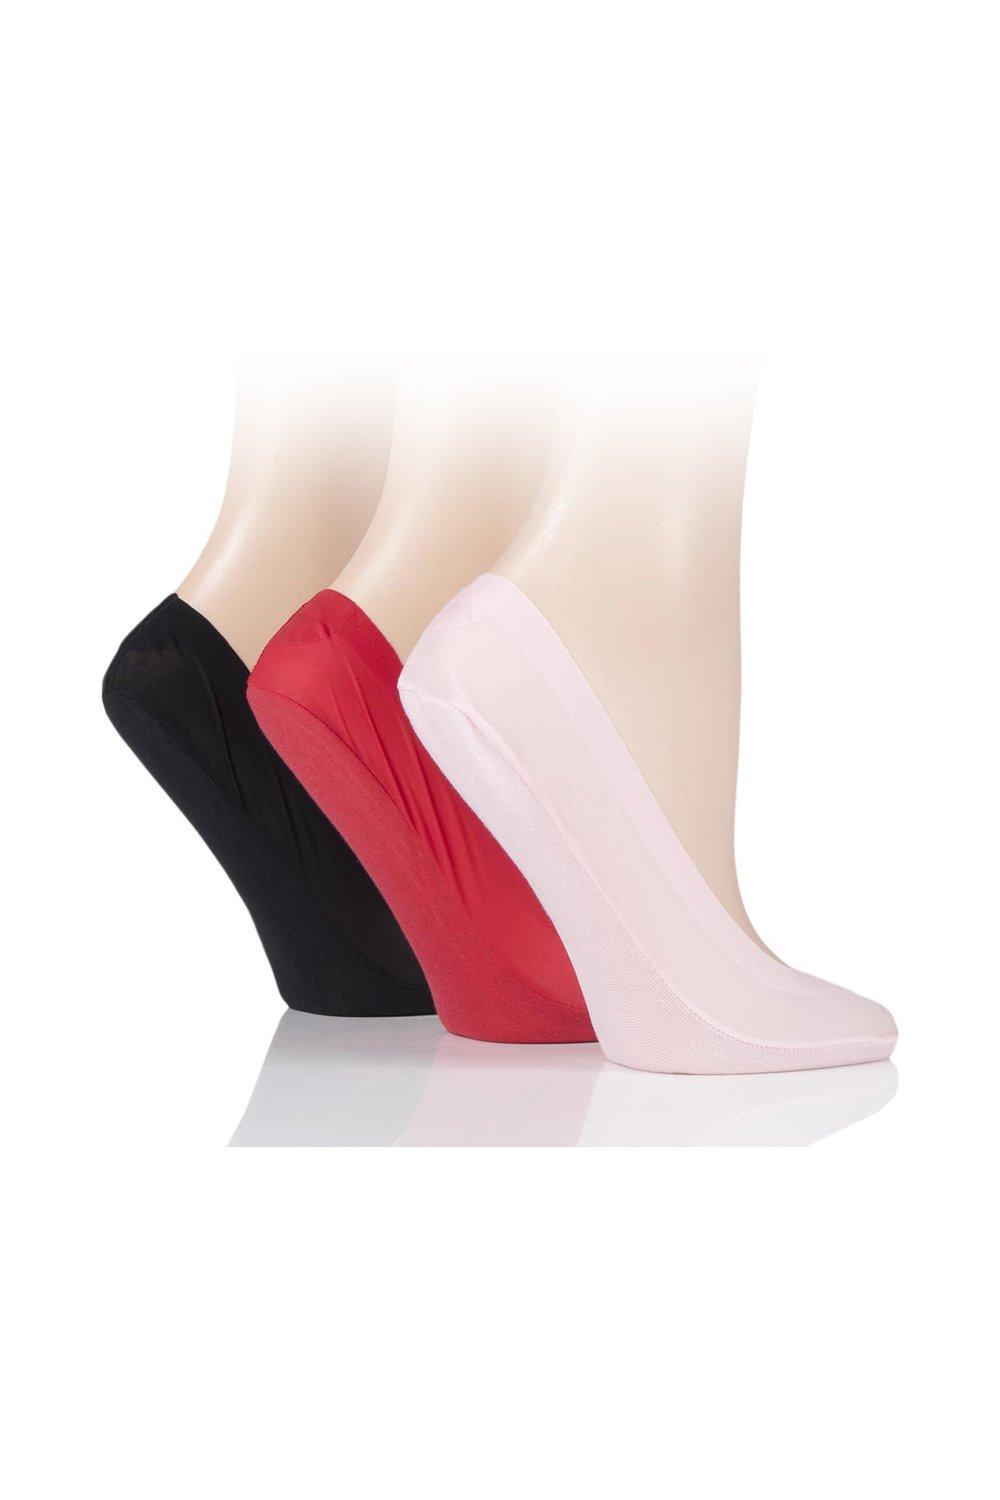 3 Pair Smooth Nylon Shoe Liners